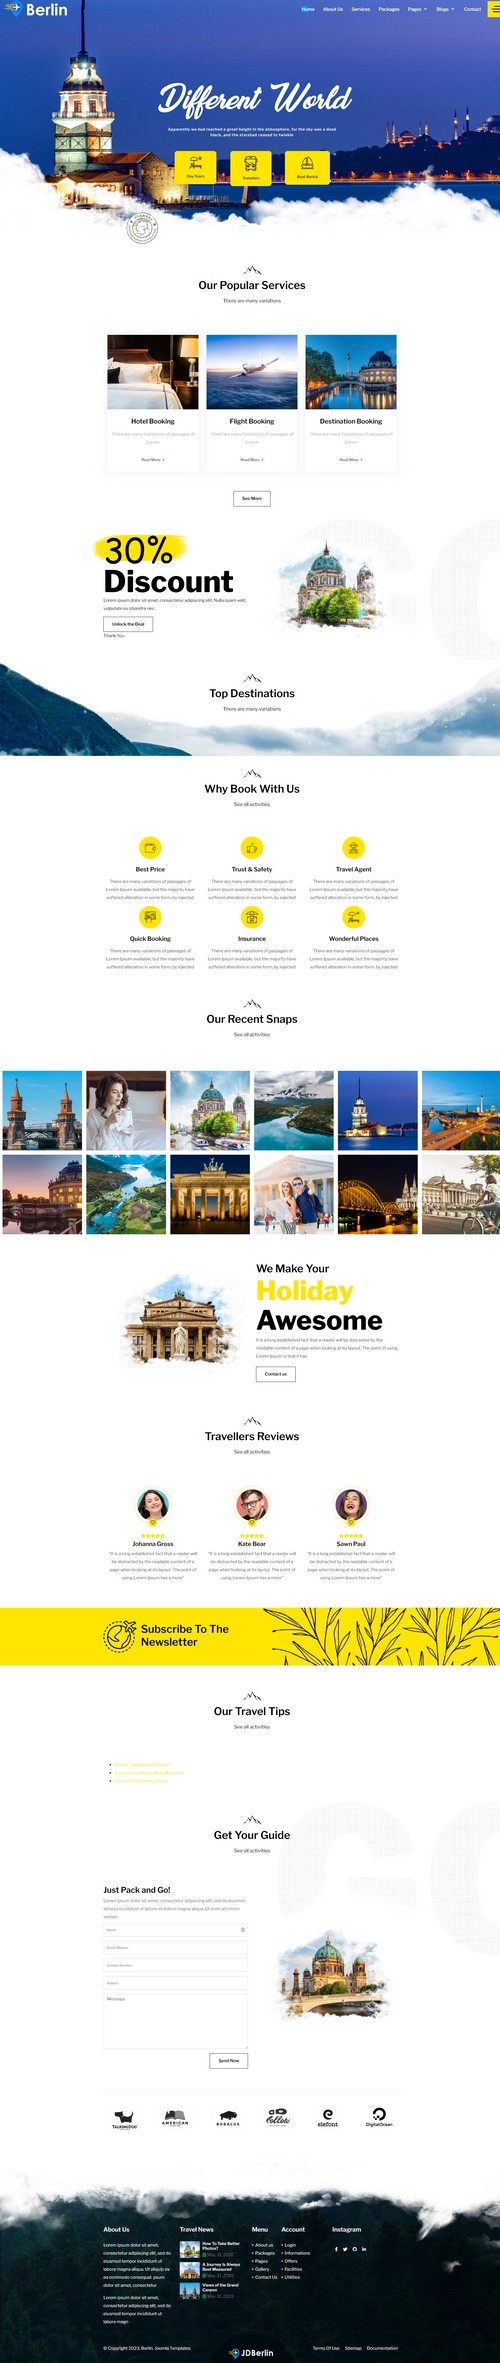 Berlin - Travel and Tourism Services Joomla 4 Template